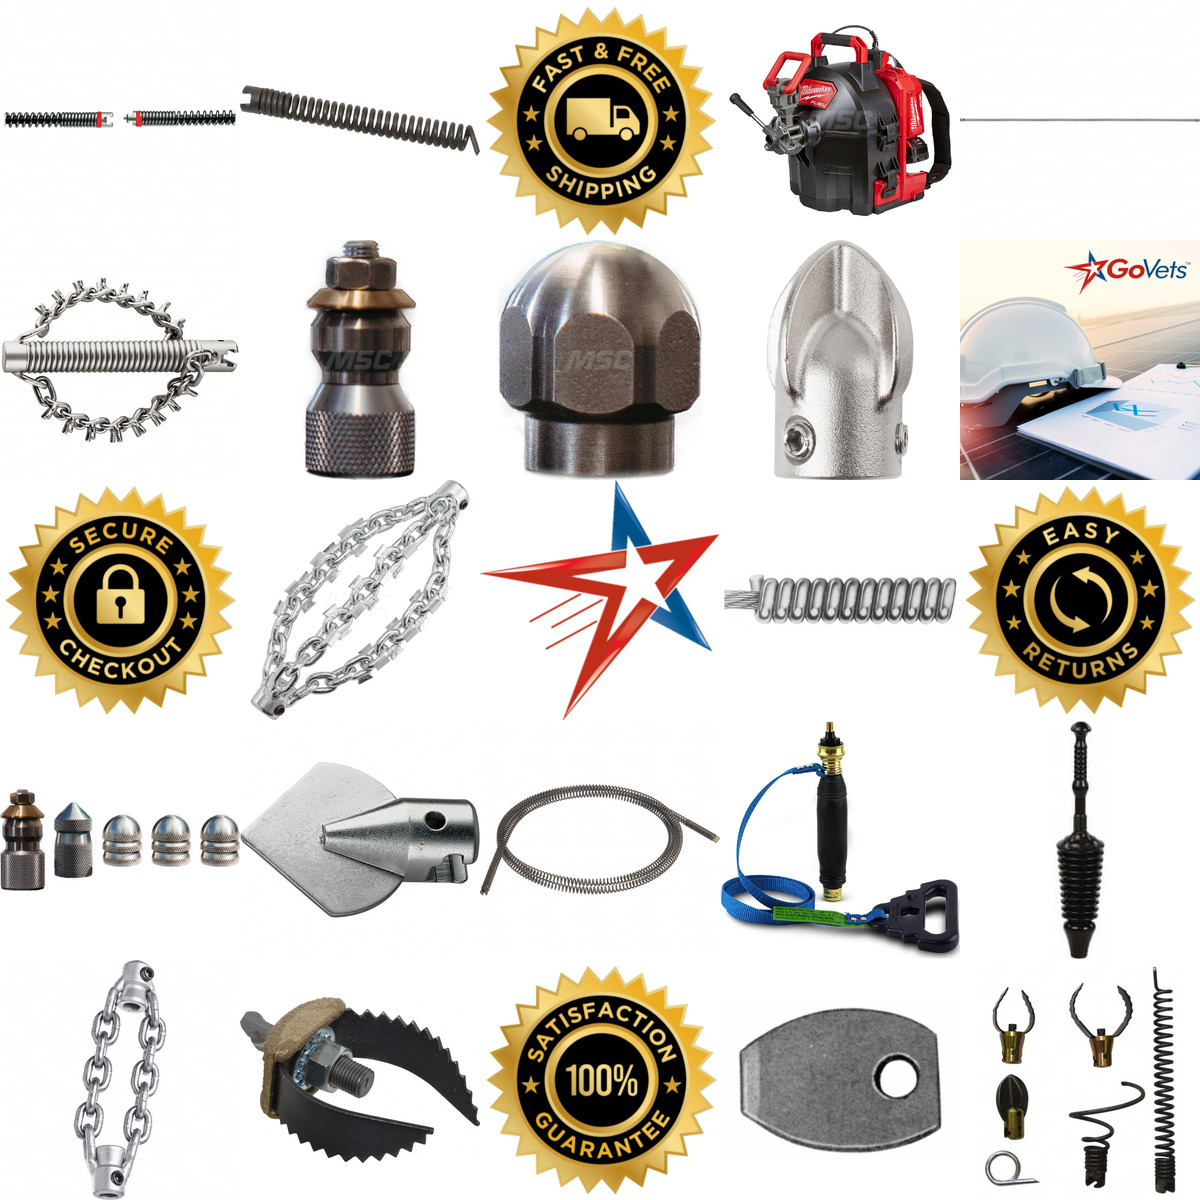 A selection of Drain Cleaning Equipment products on GoVets